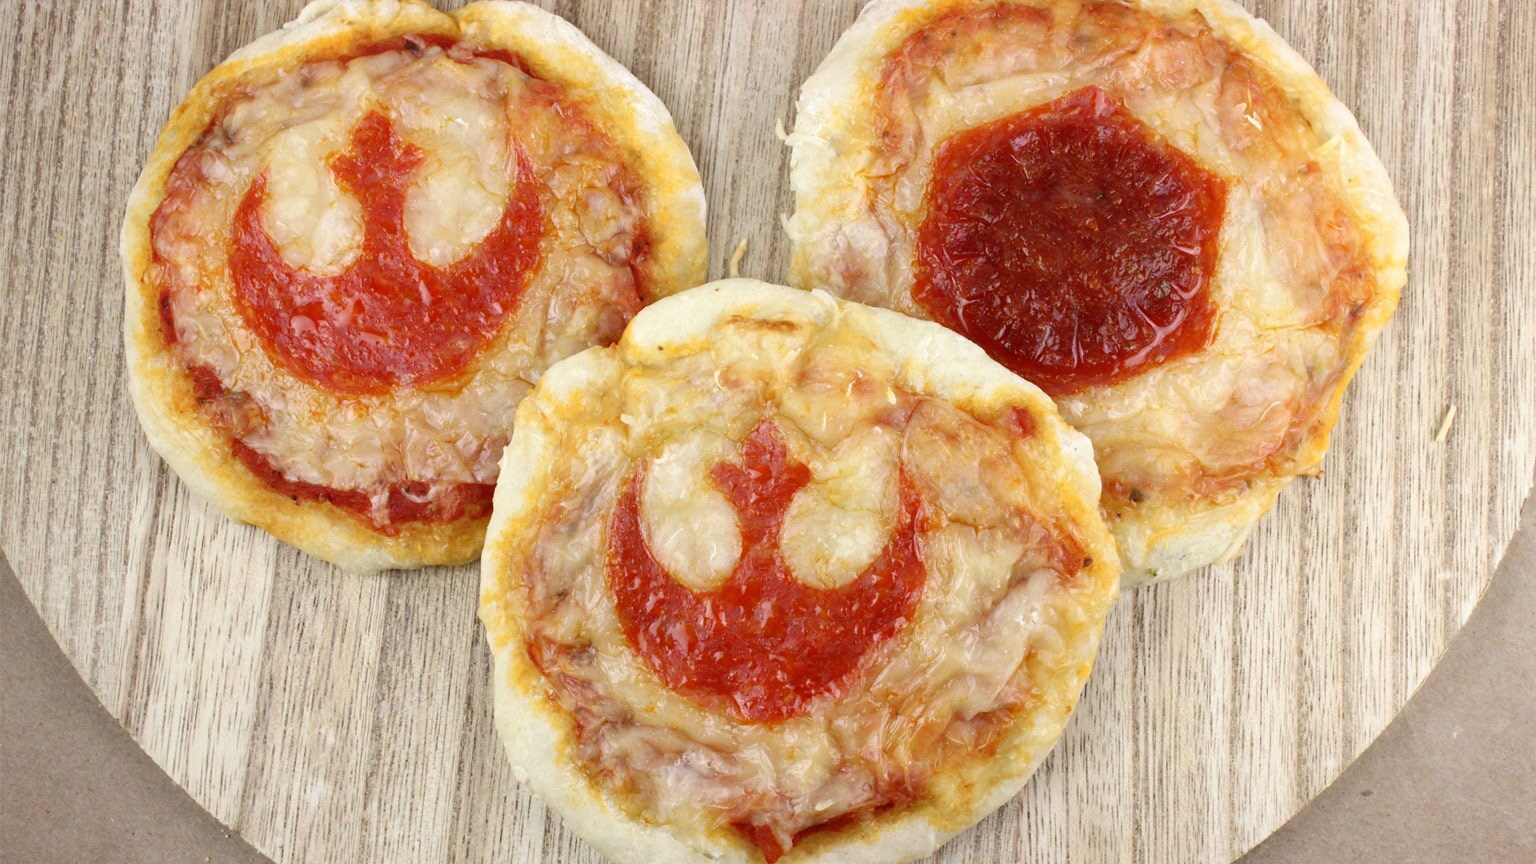 Deliciously Declare Your Allegiance with Resistance and First Order Pizza